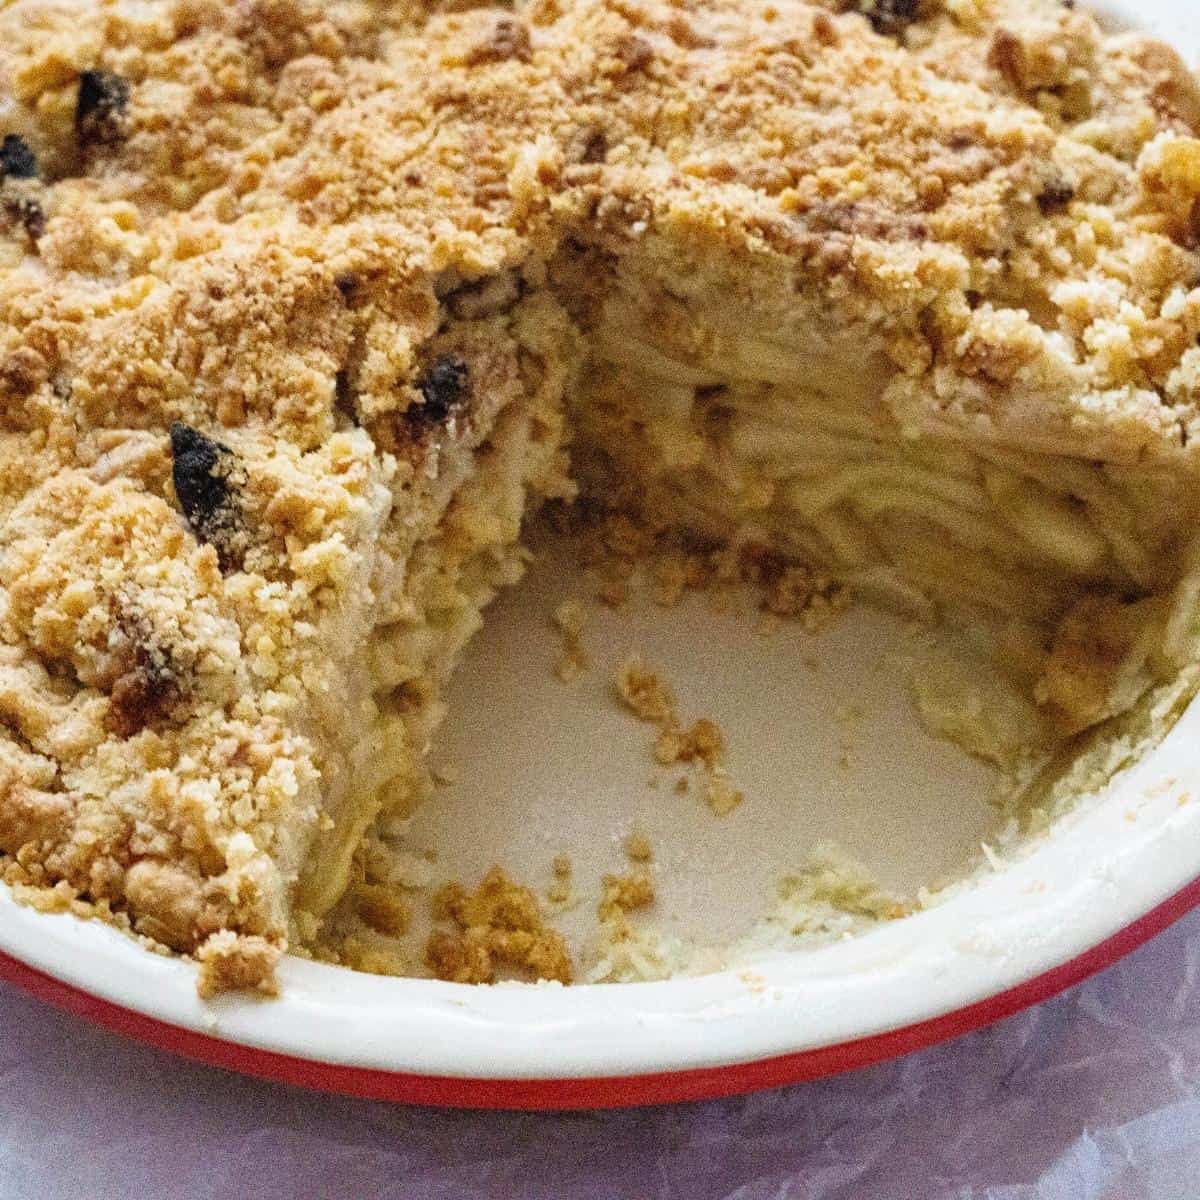 A sliced pie with apples and crumble.